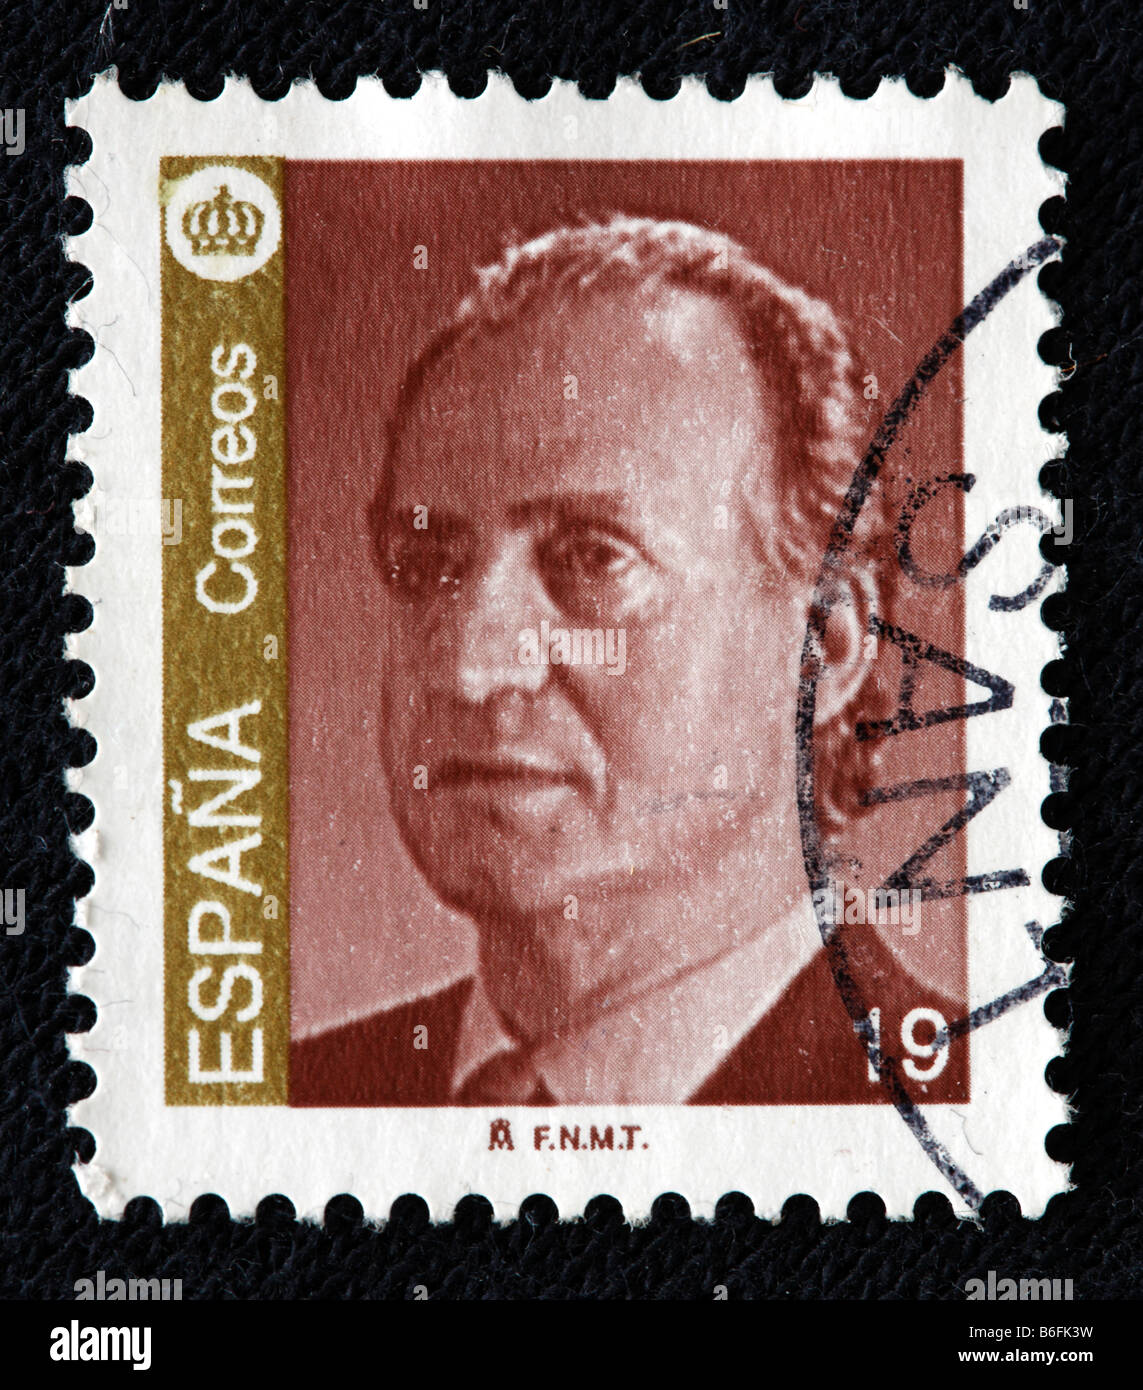 King Juan Carlos I of Spain (1975 to present), postage stamp, Spain Stock Photo